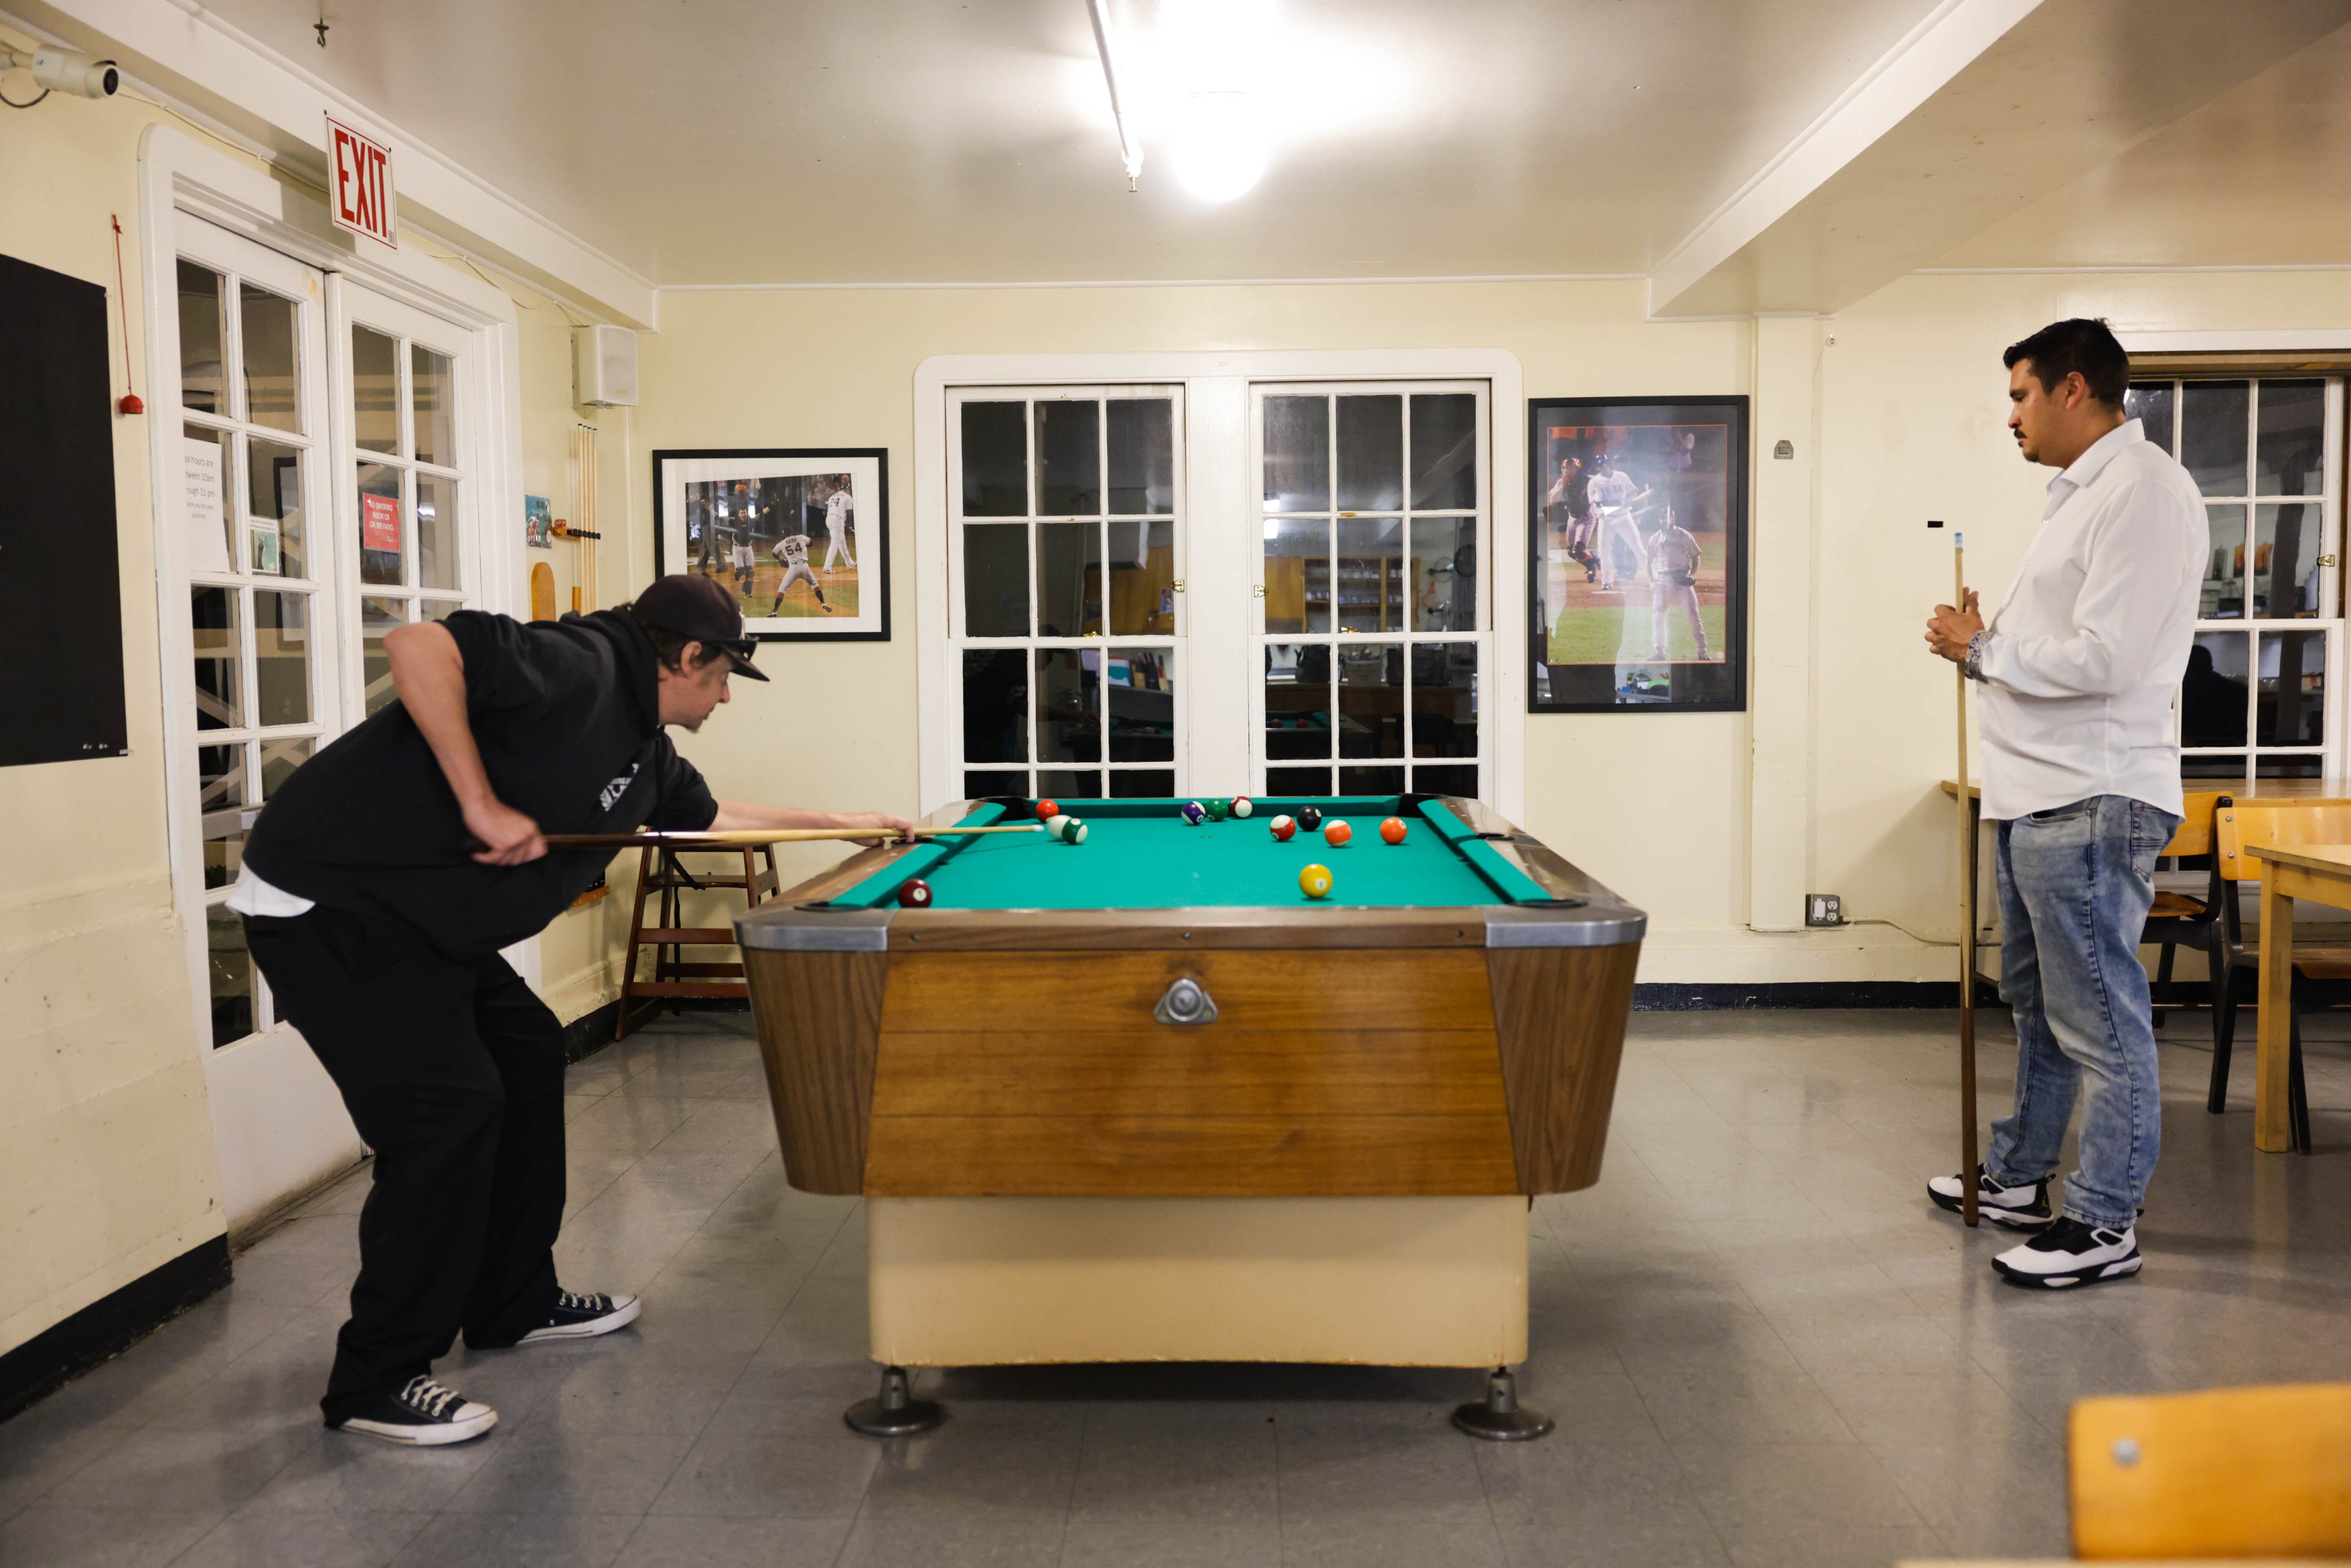 Two men are playing pool in a room with sports photos on the walls.